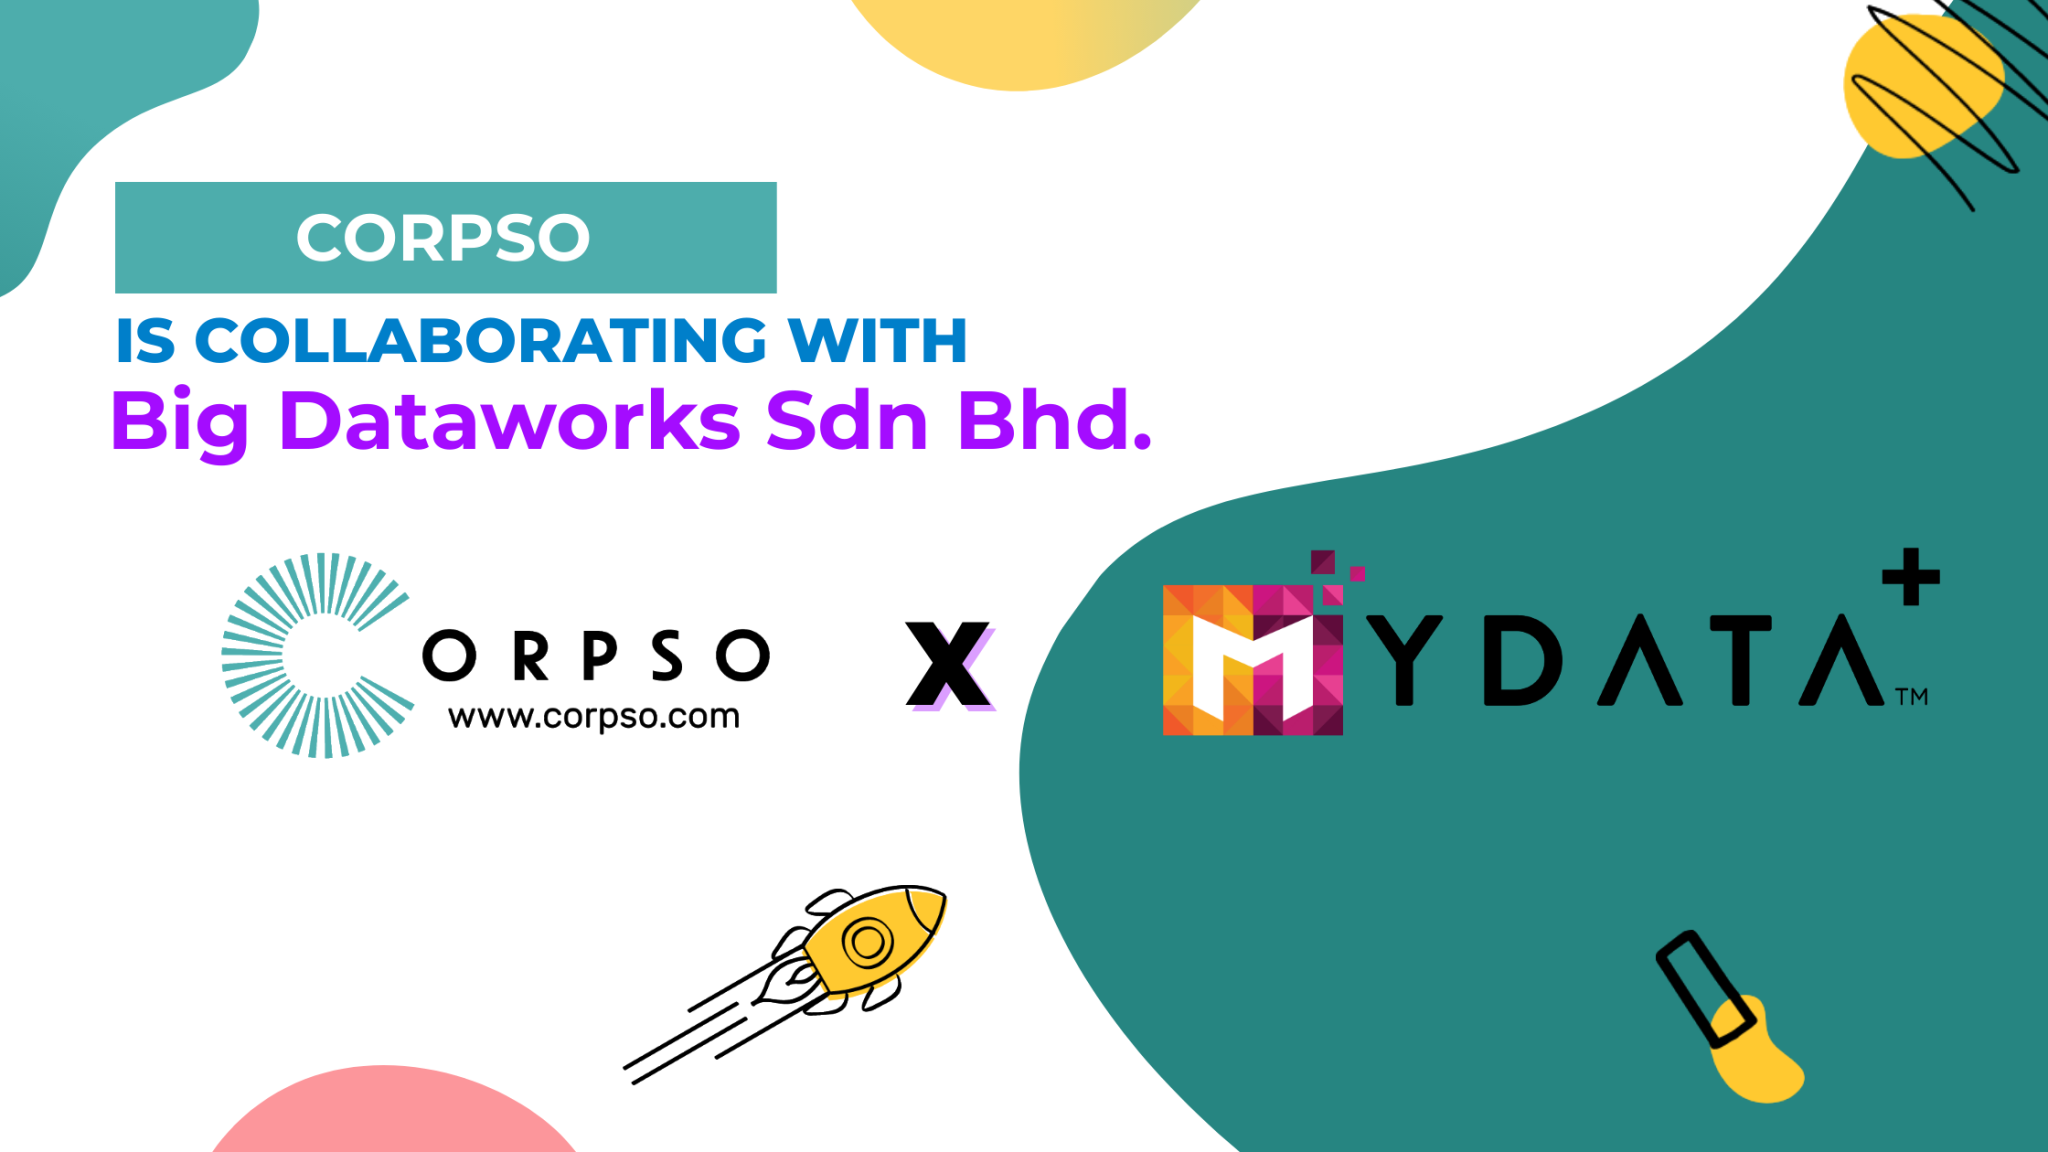 Corpso is collaborating with Big Dataworks